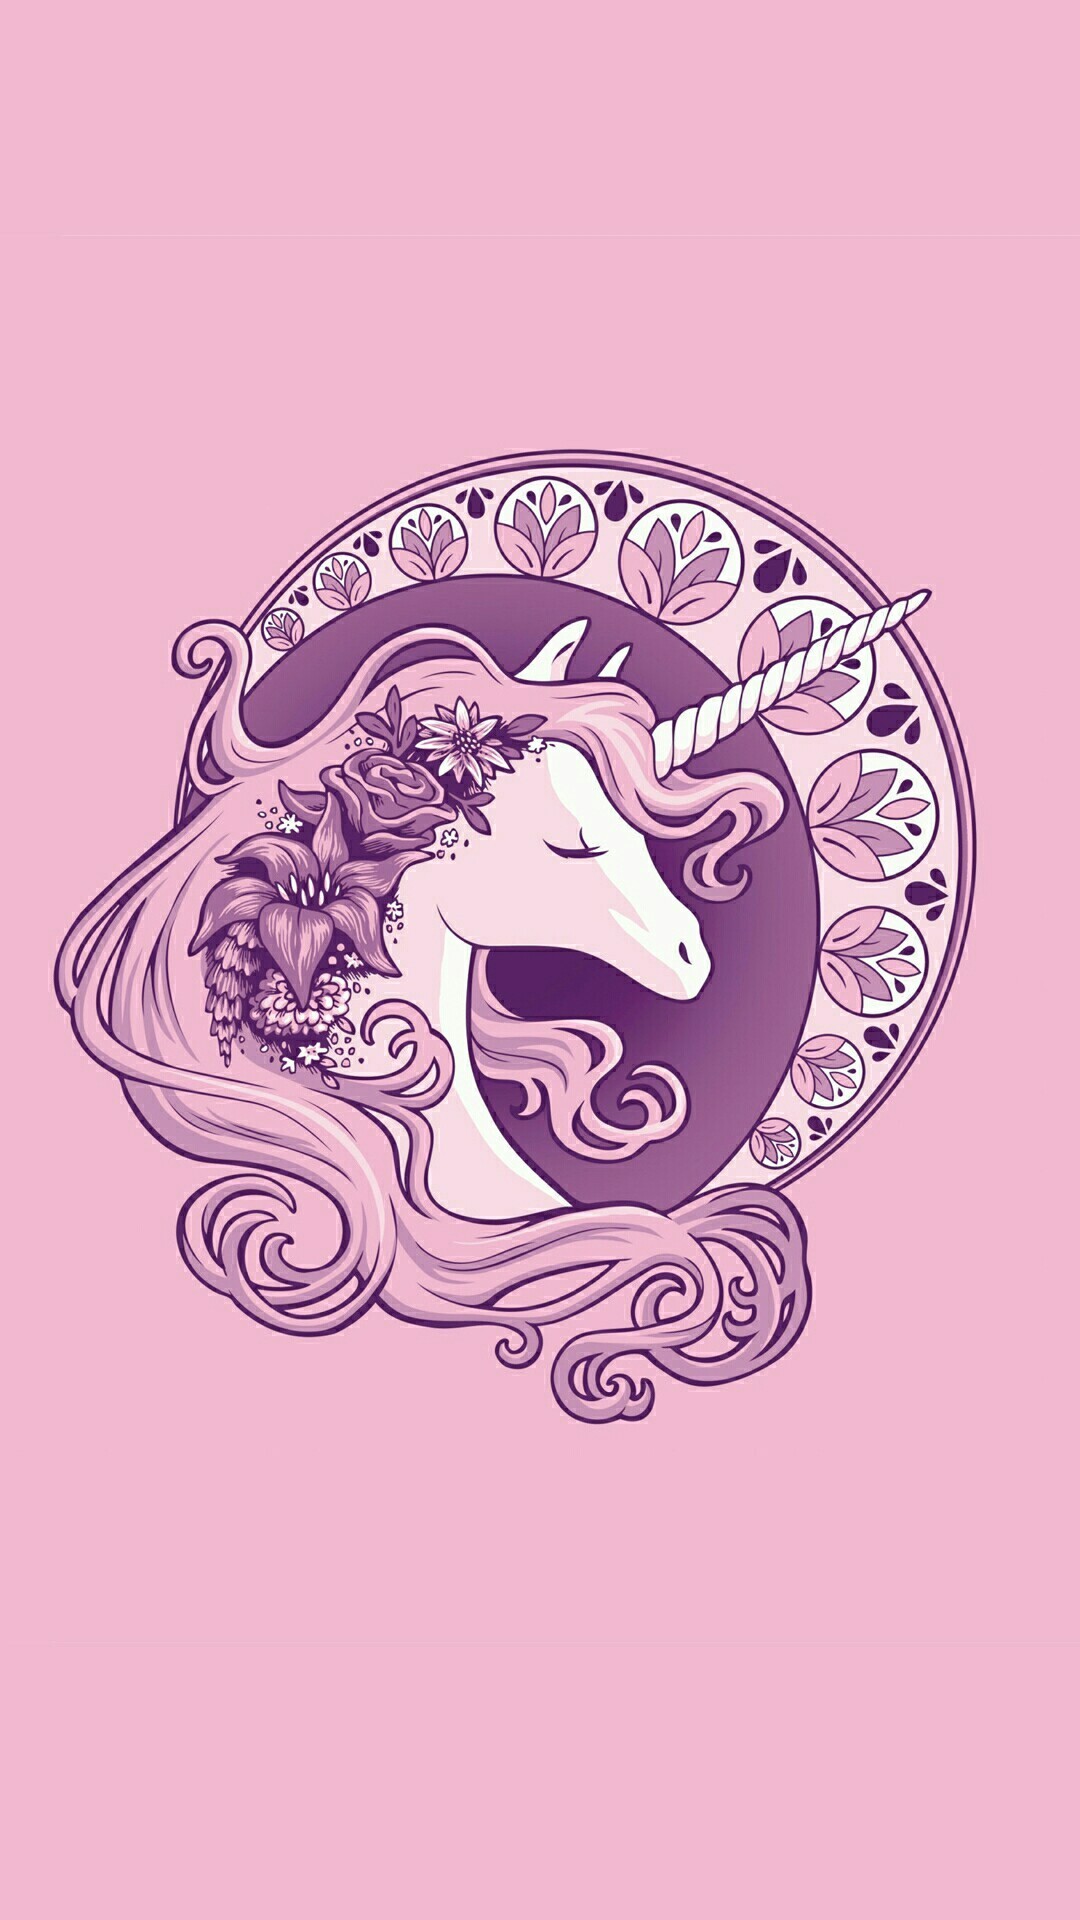 Wallpapers iPhone Cute Unicorn With high-resolution 1080X1920 pixel. You can use this wallpaper for your iPhone 5, 6, 7, 8, X, XS, XR backgrounds, Mobile Screensaver, or iPad Lock Screen